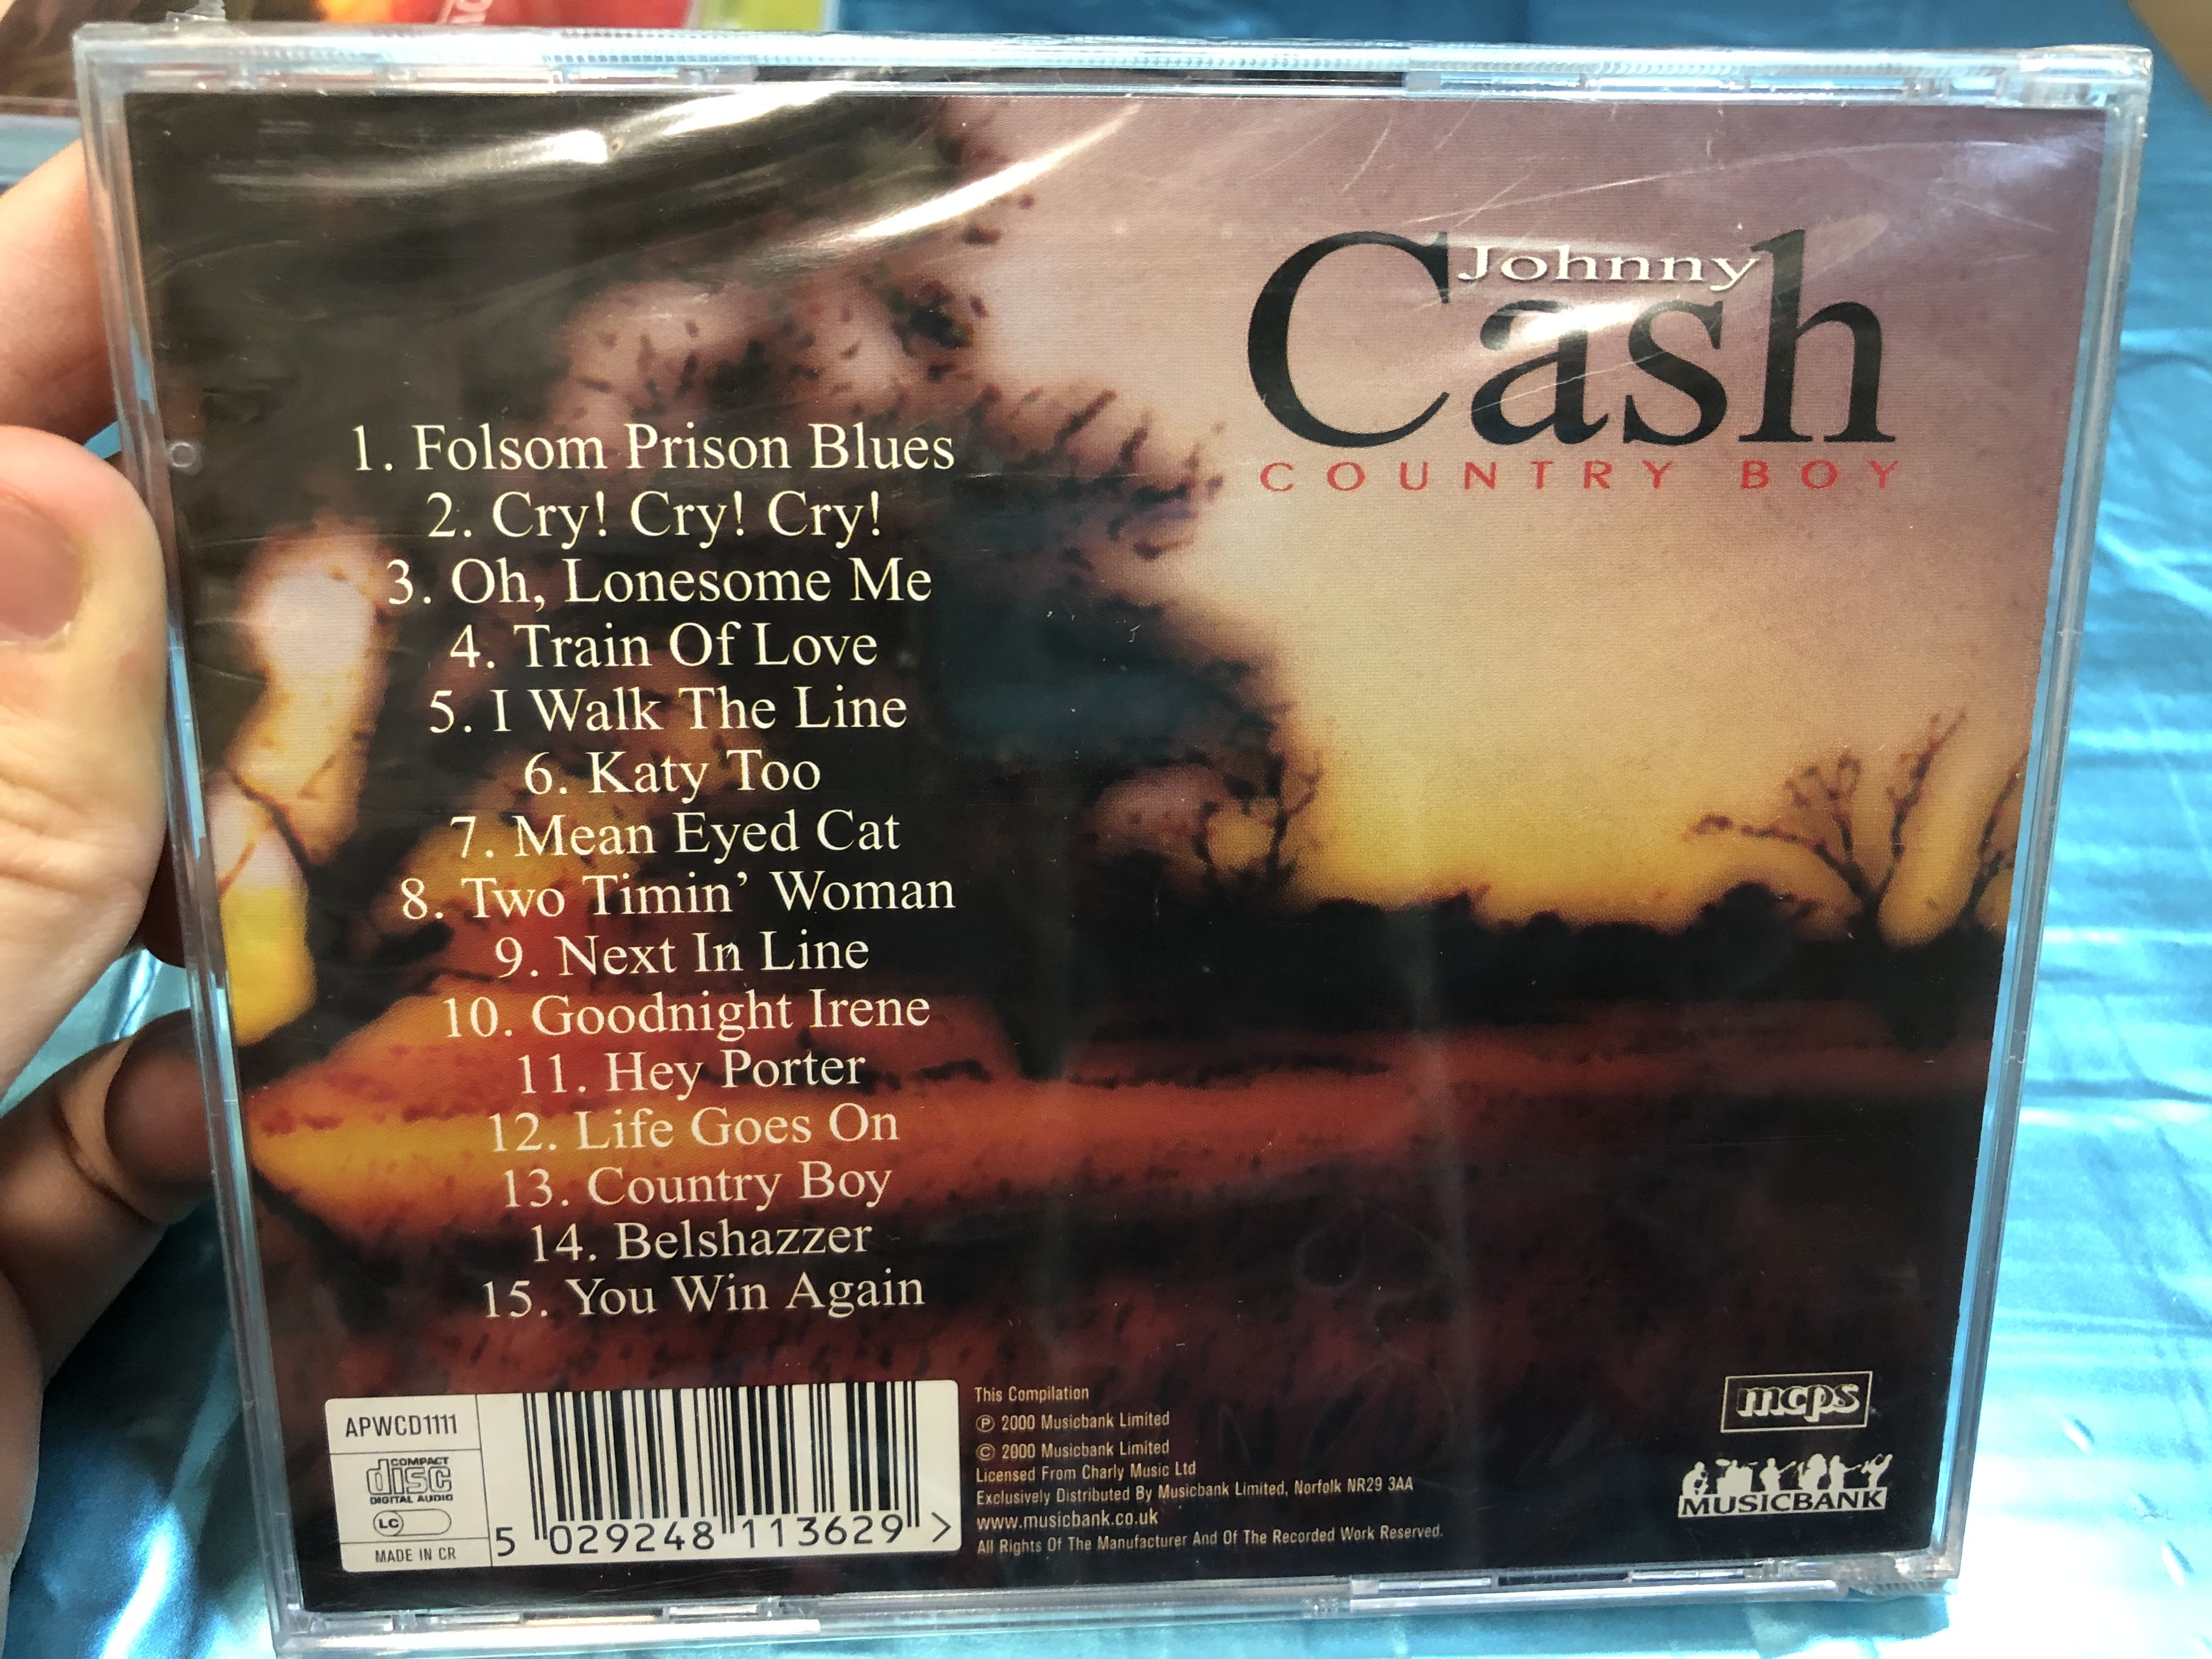 johnny-cash-country-boy-oh-lonesome-me-cry-cry-cry-country-boy-train-of-love-many-more-musicbank-limited-audio-cd-2000-apwcd1111-3-.jpg